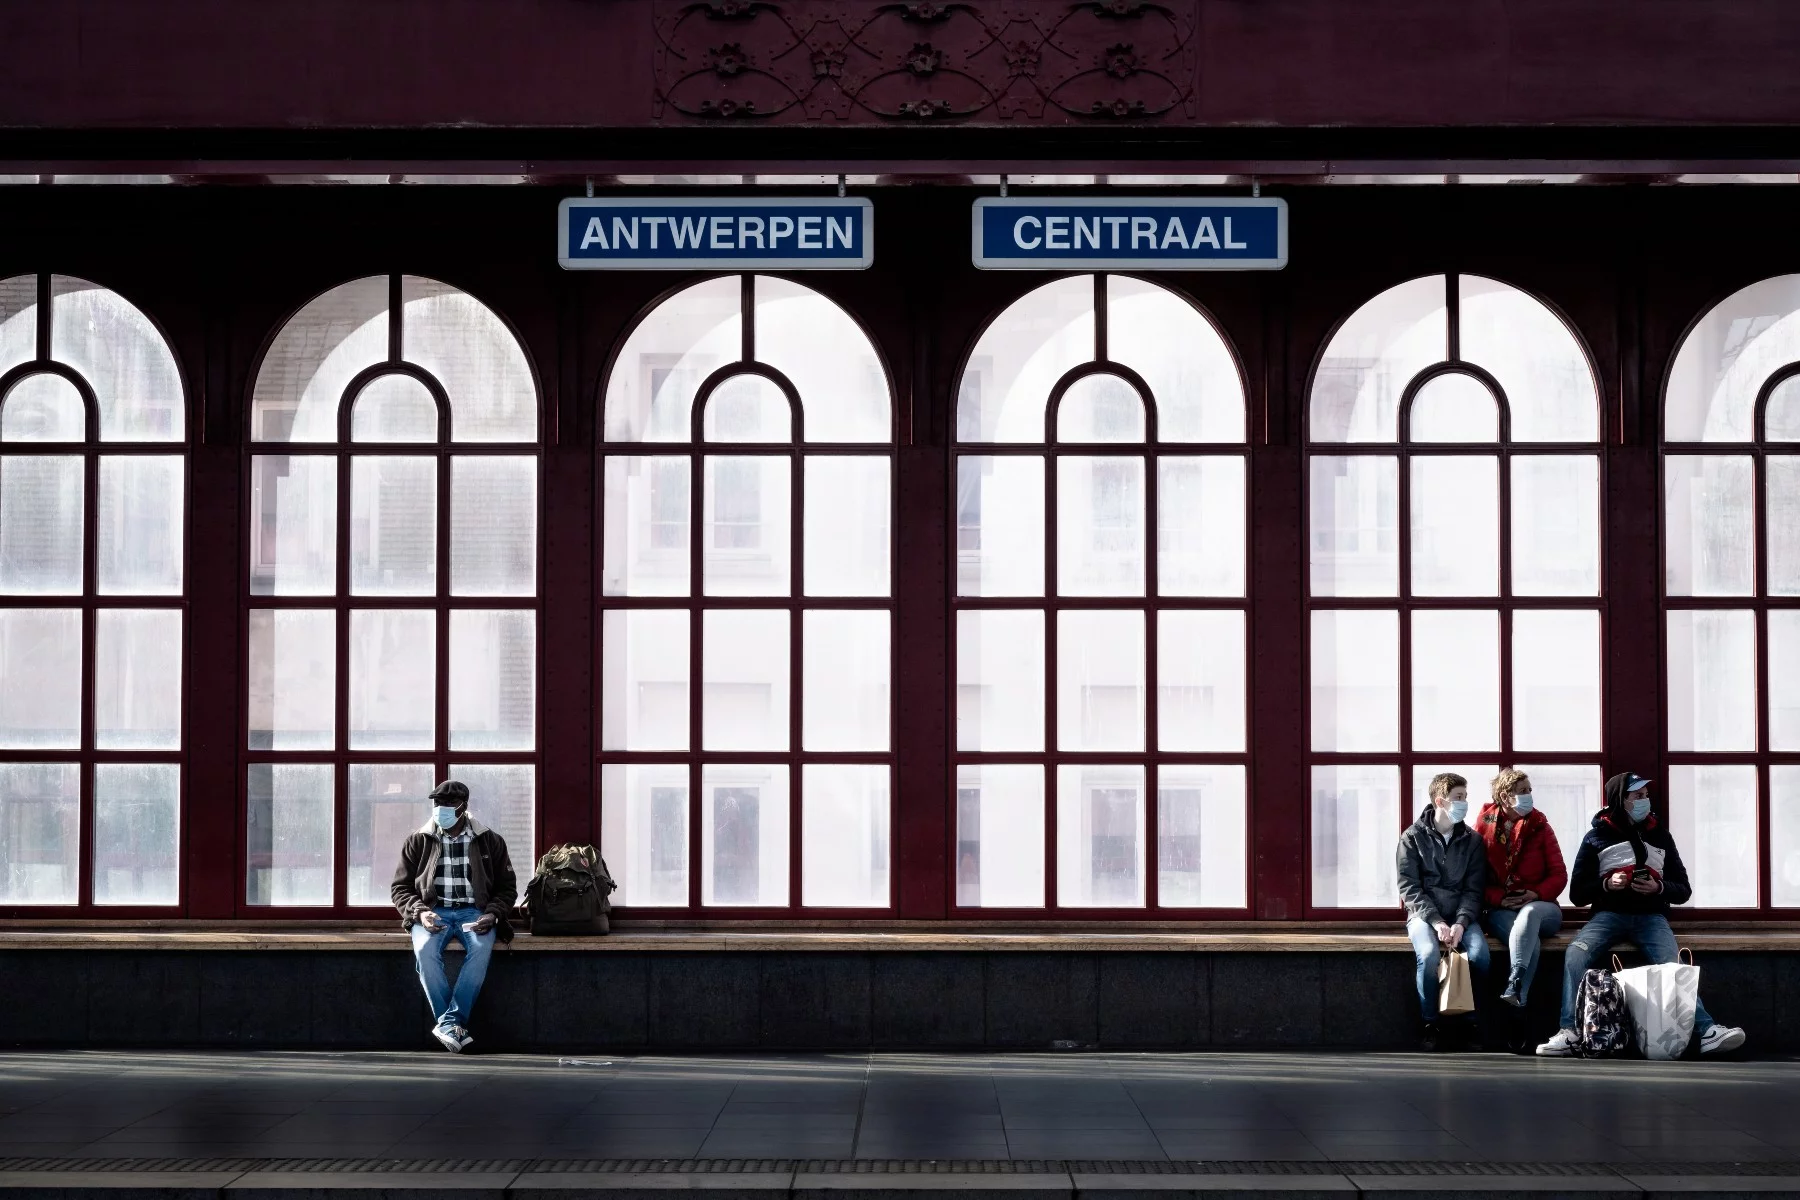 People keeping their (social) distance at Antwerp Central Station.